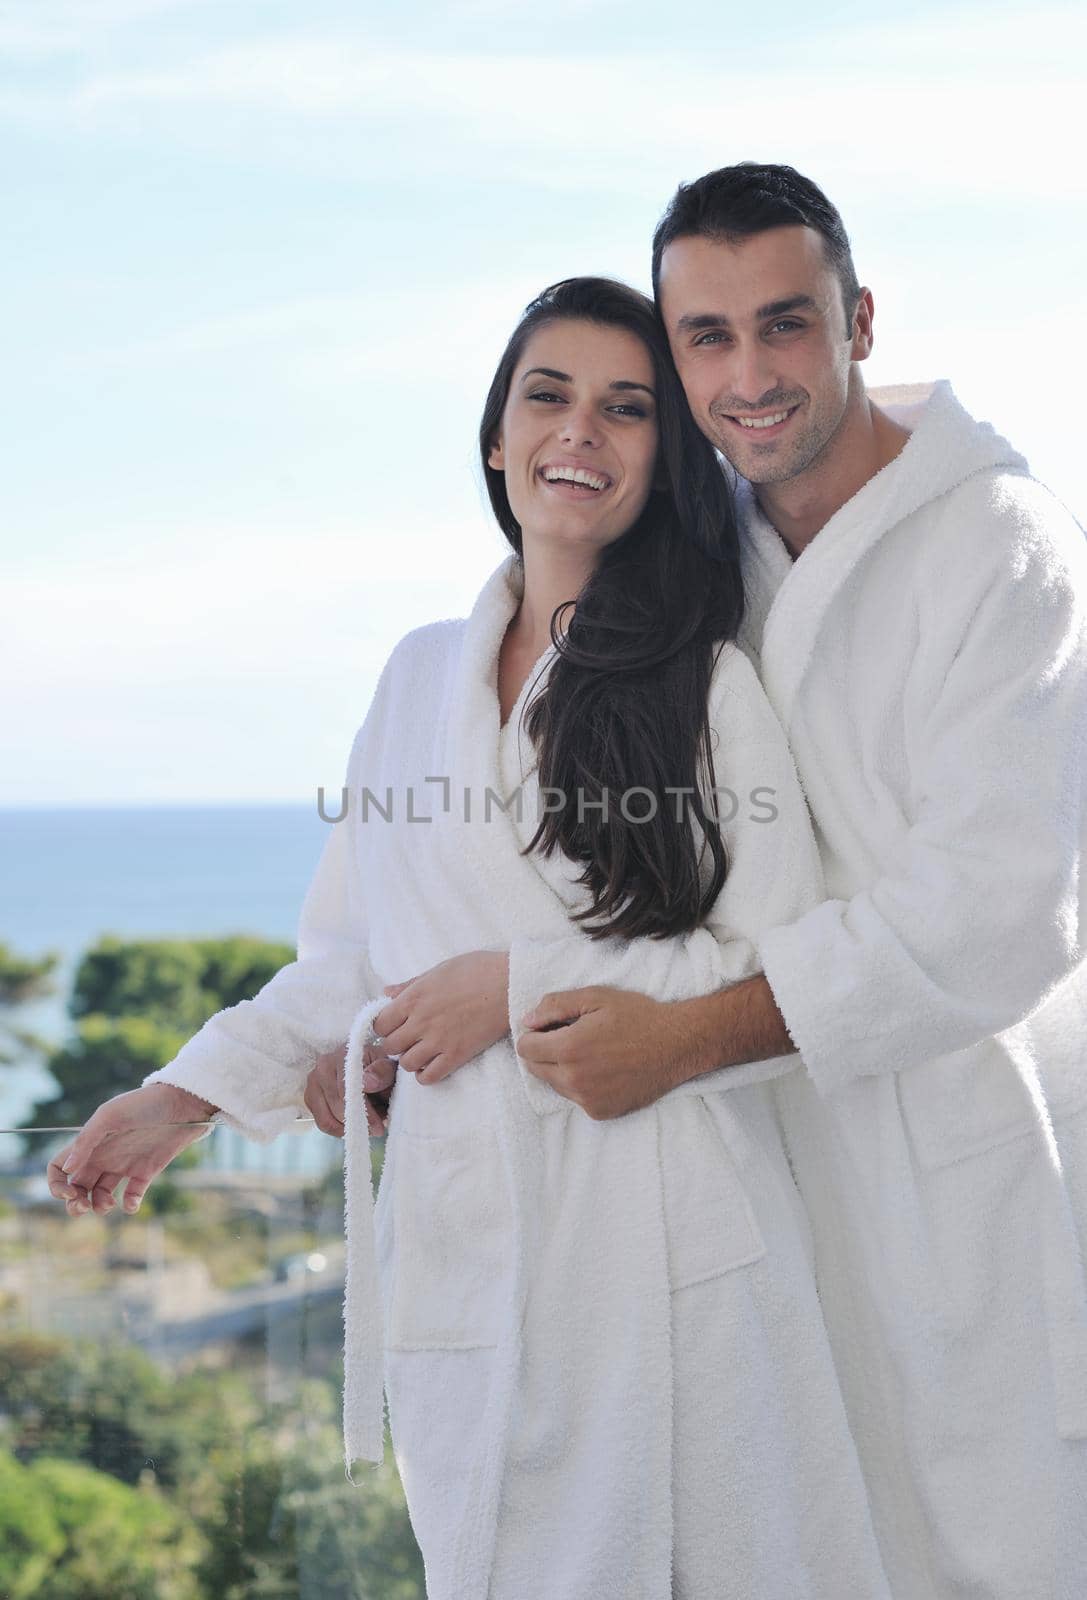 happy young couple relax on balcony outdoor with ocean and blue sky in background